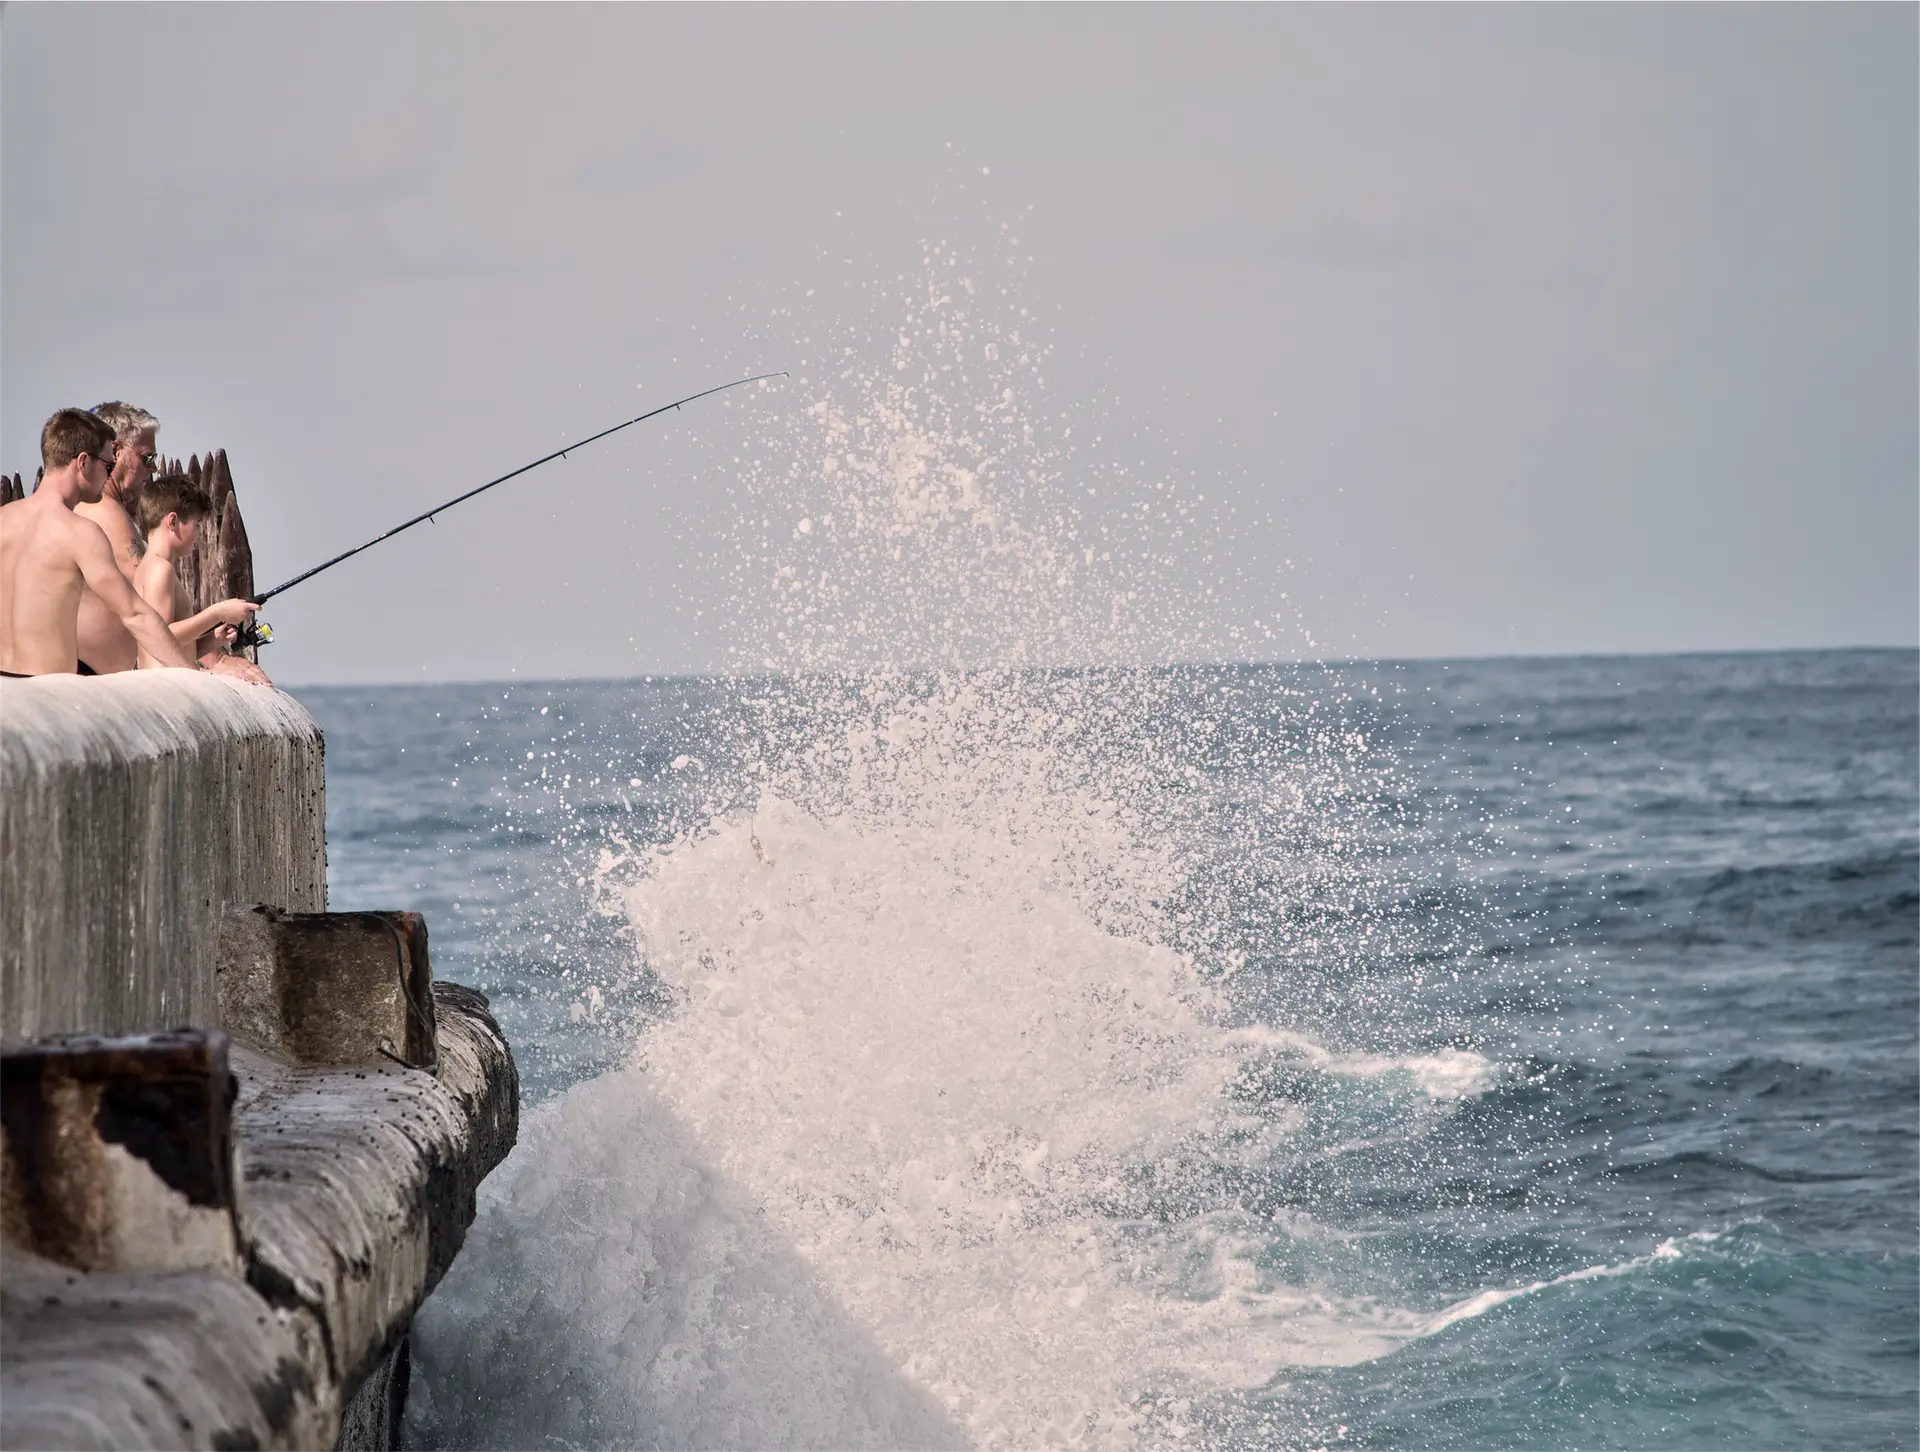 Fishing from a seawall in rough conditions